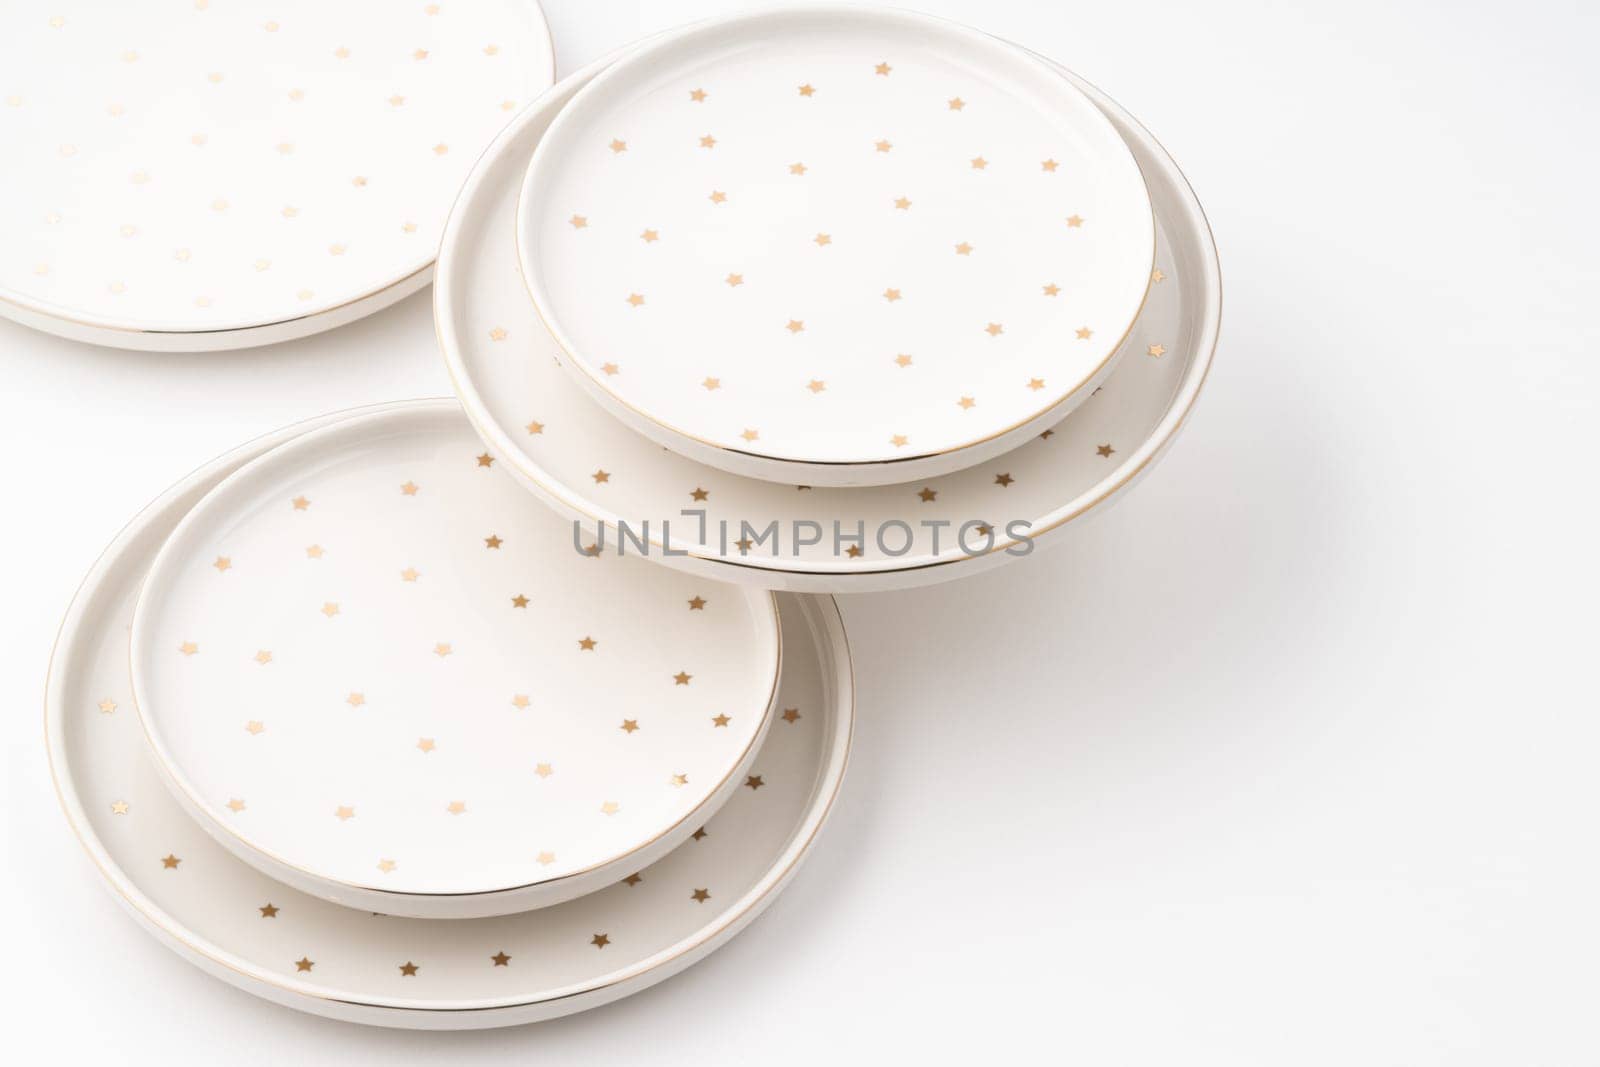 The ceramic plates isolated on white background